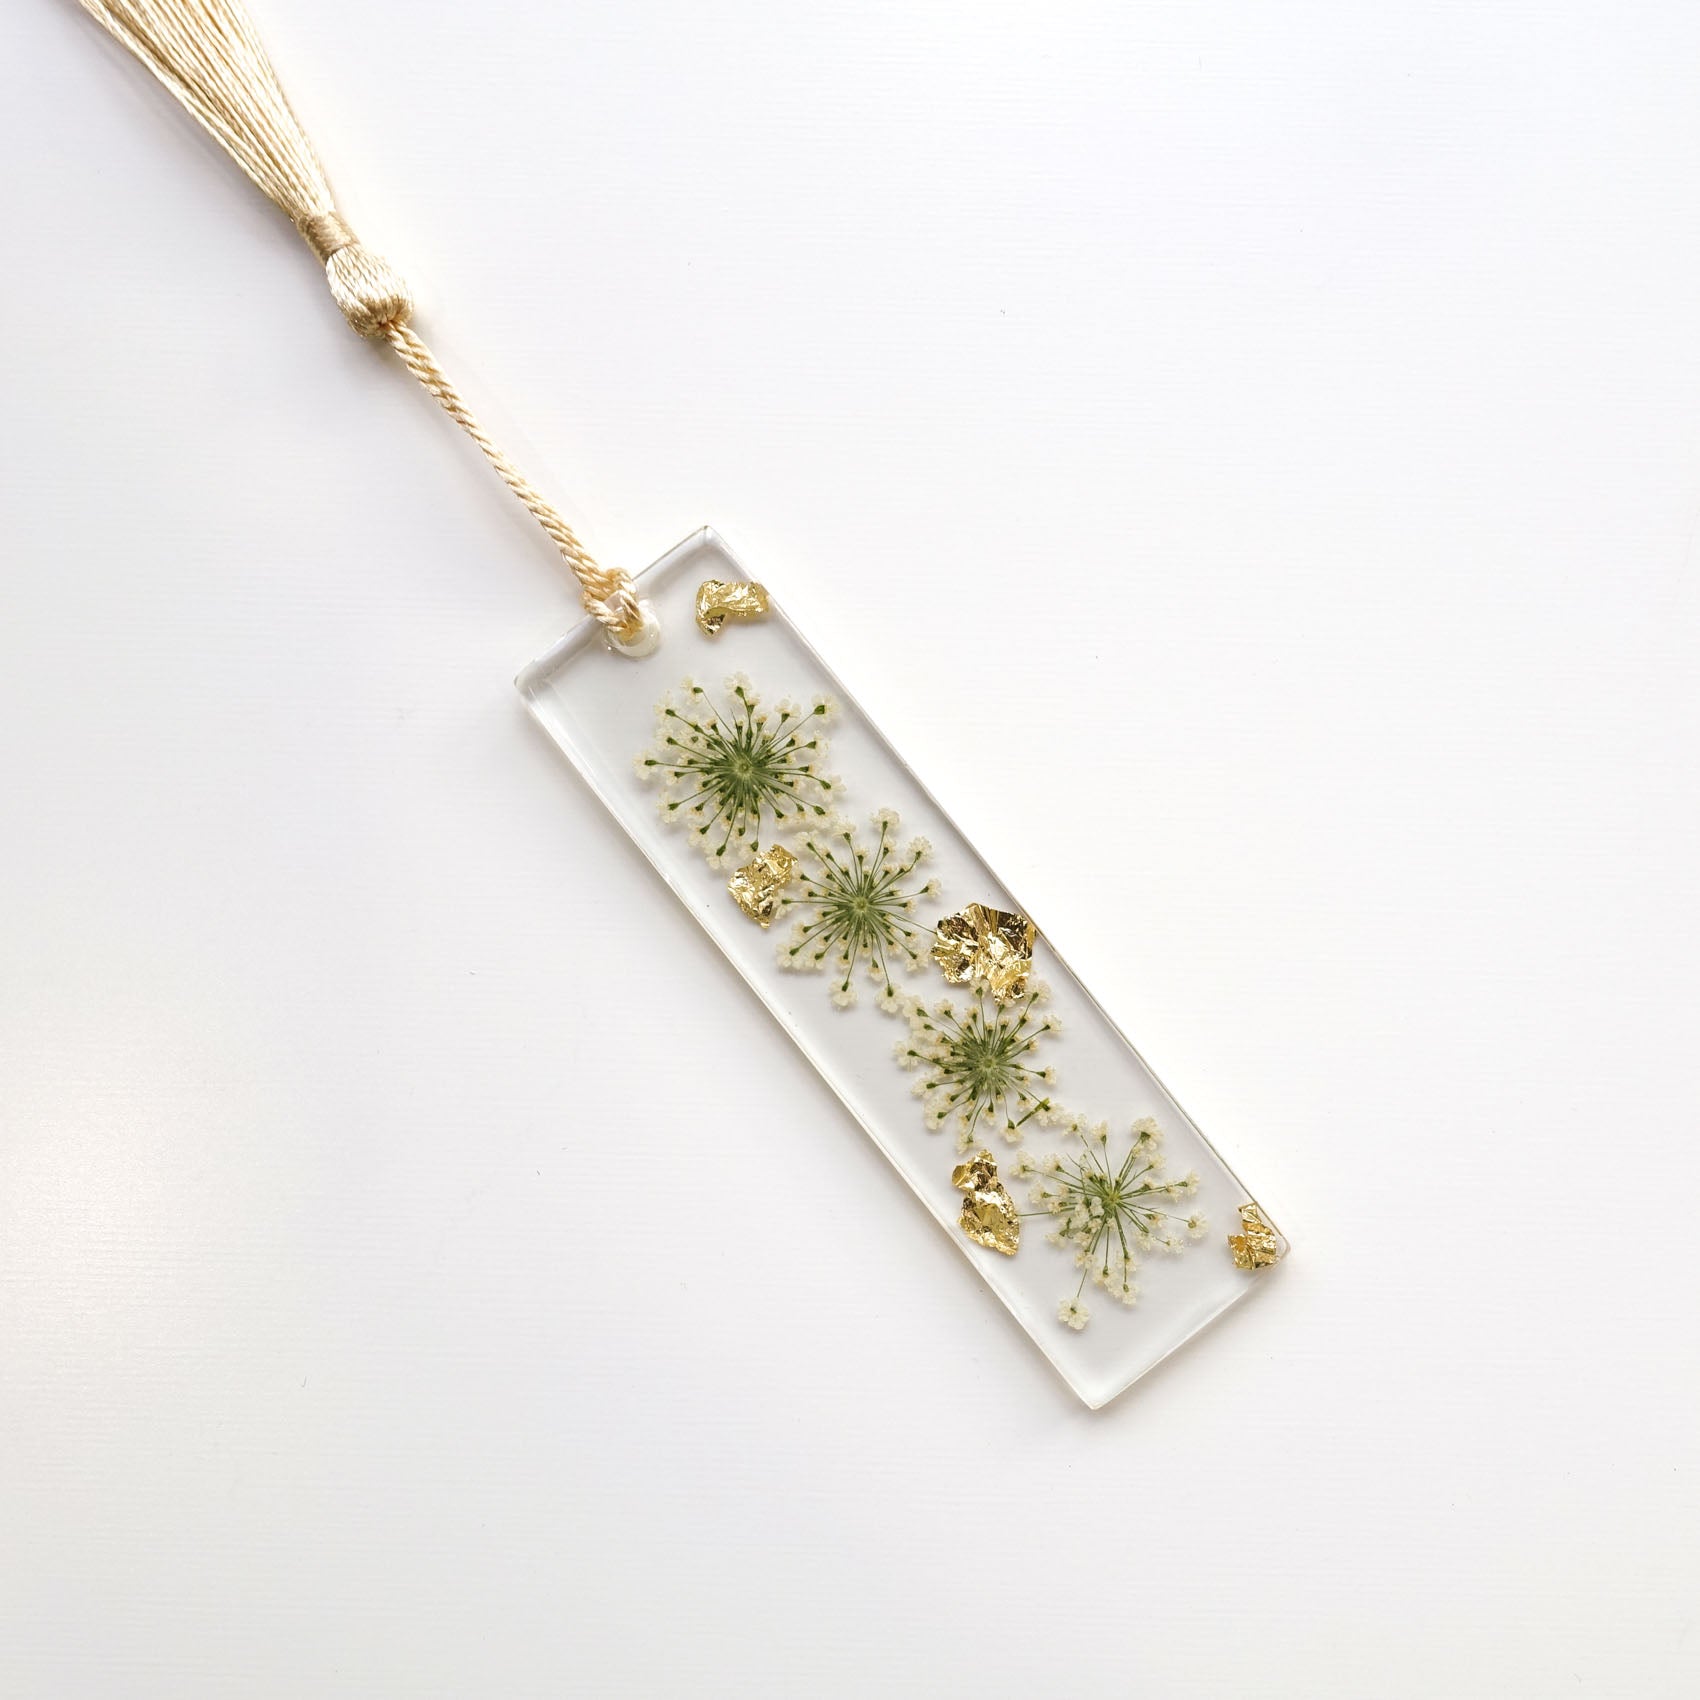 white daisy baby's breath pressed dried flowers australia for resin art bookmark crafts